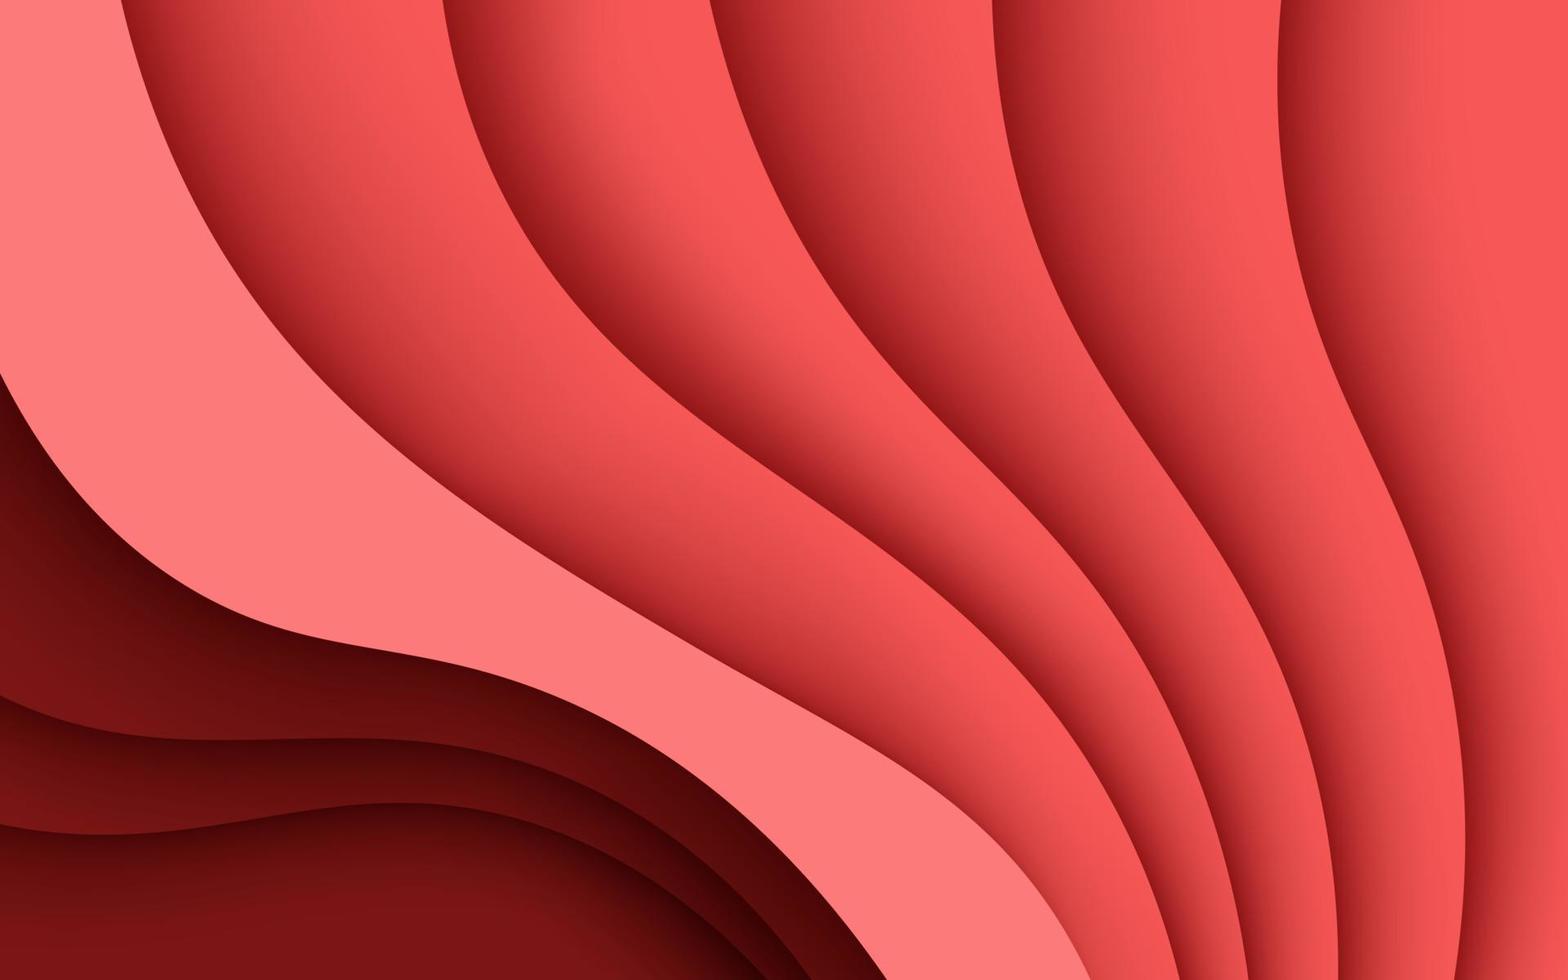 dynamic abstract red wave overlapping layers papercut background. eps10 vector